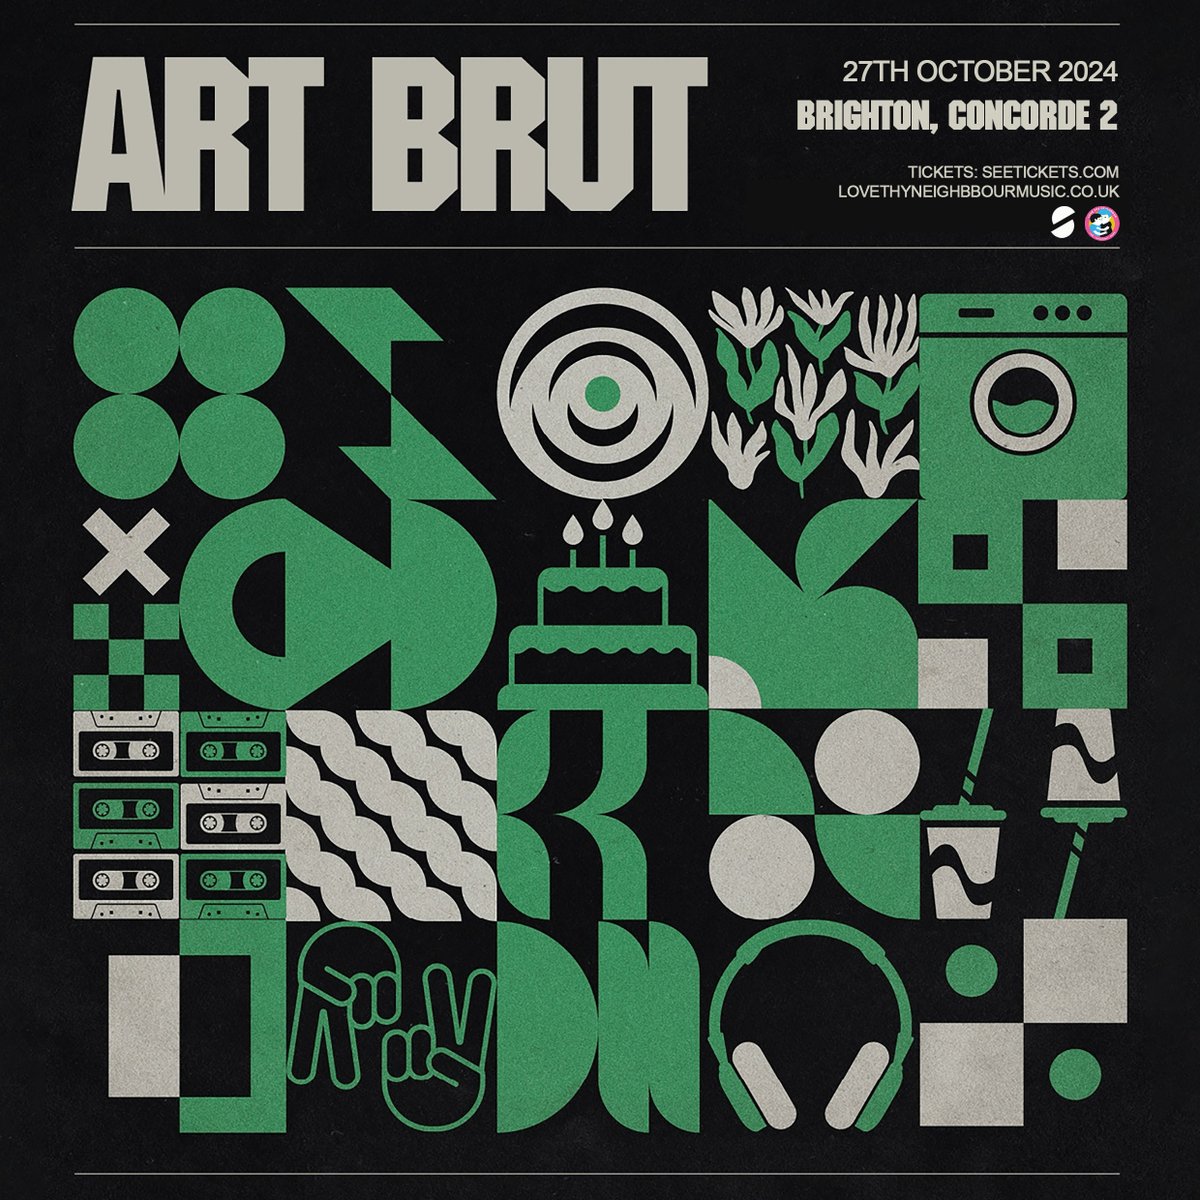 🌶New show!🌶 @Art_Brut_ return with a new LP for the first time in 7 years and bring their distinctive poppy post punk to Brighton in October! 📆 27/10 🏛 @concorde_2 🎫 @seetickets or our website